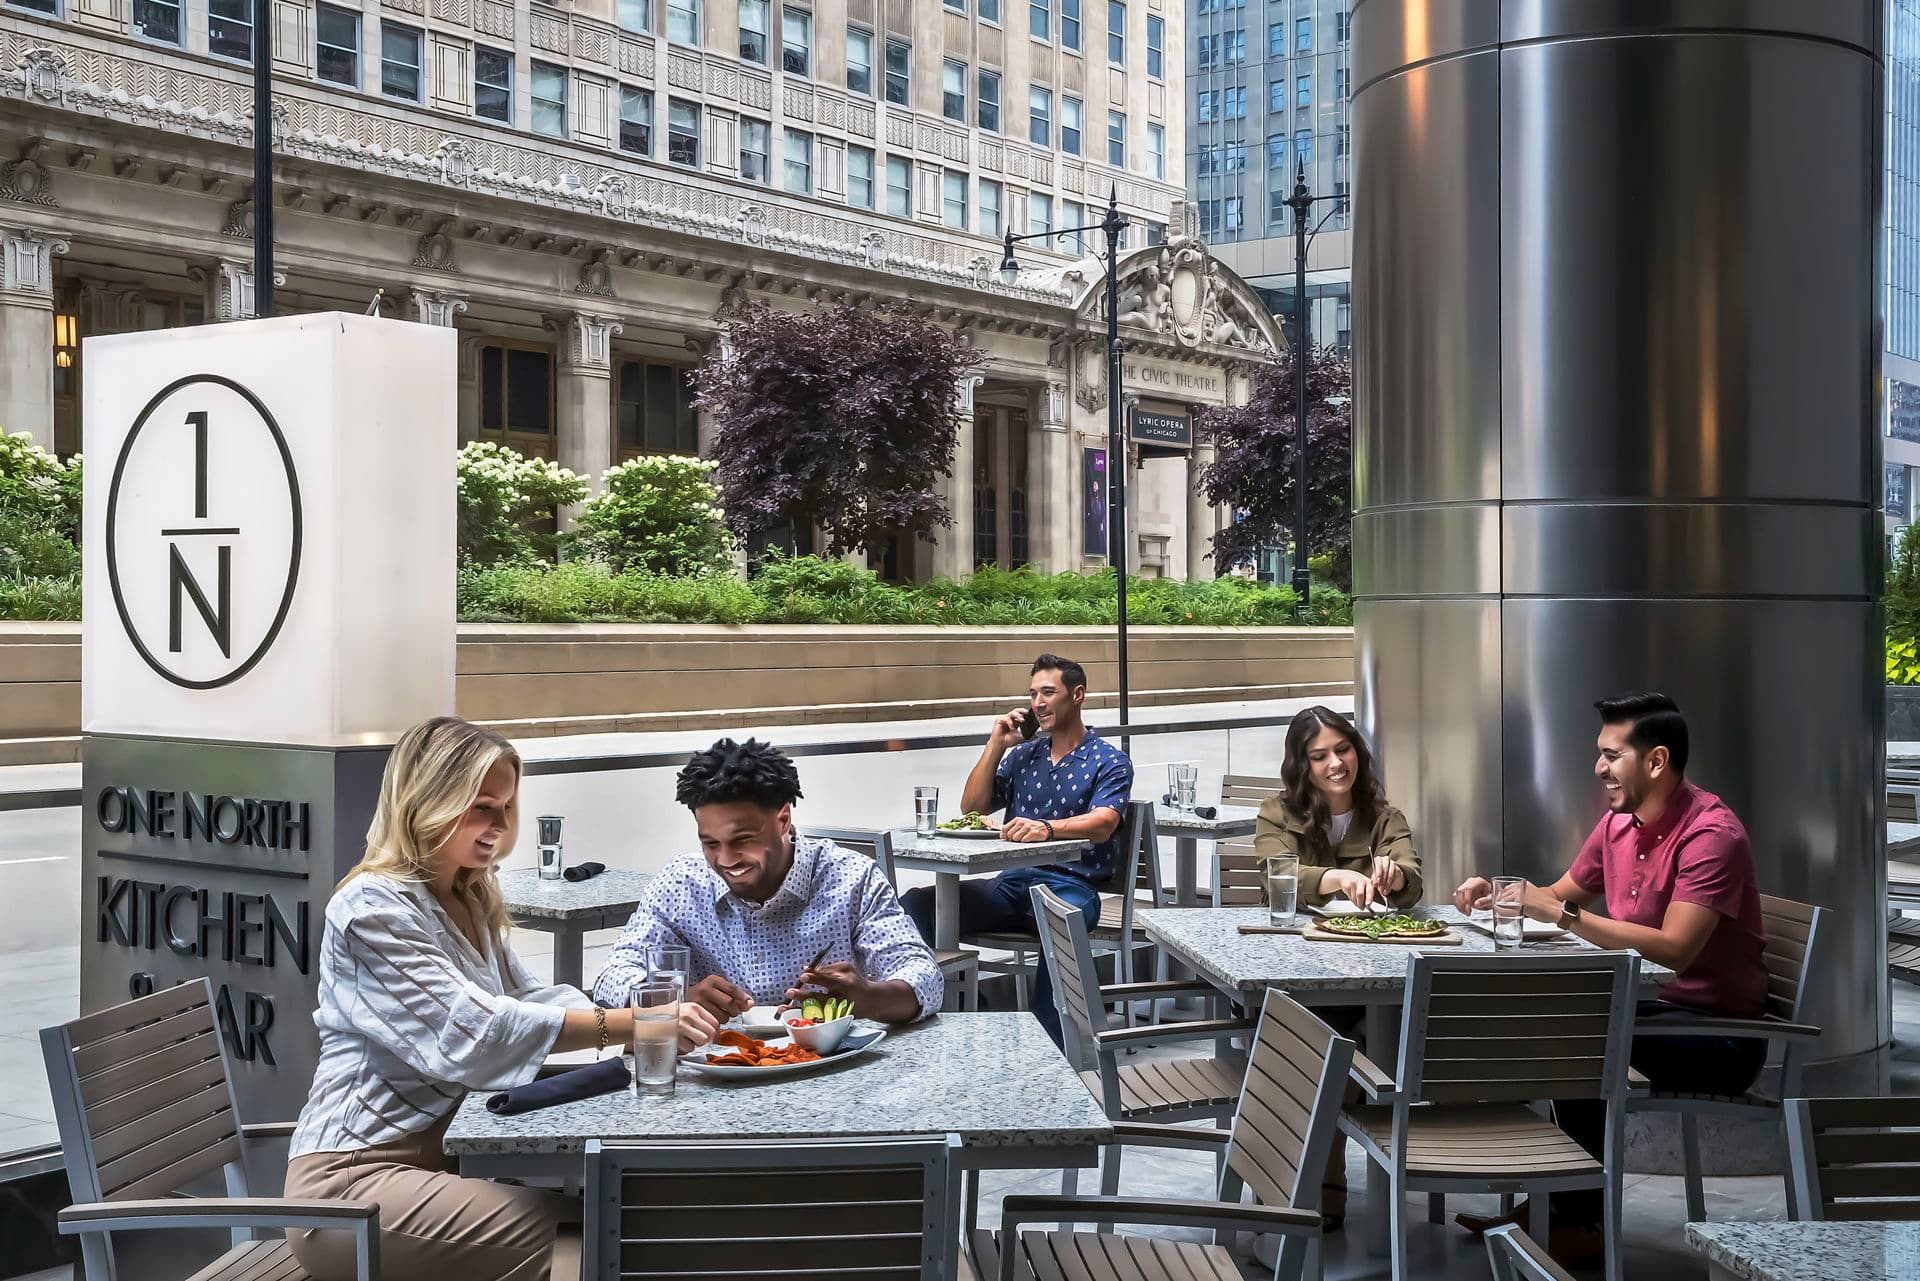 Make the most of warm days with lunch al fresco on One North Kitchen’s outdoor patio.